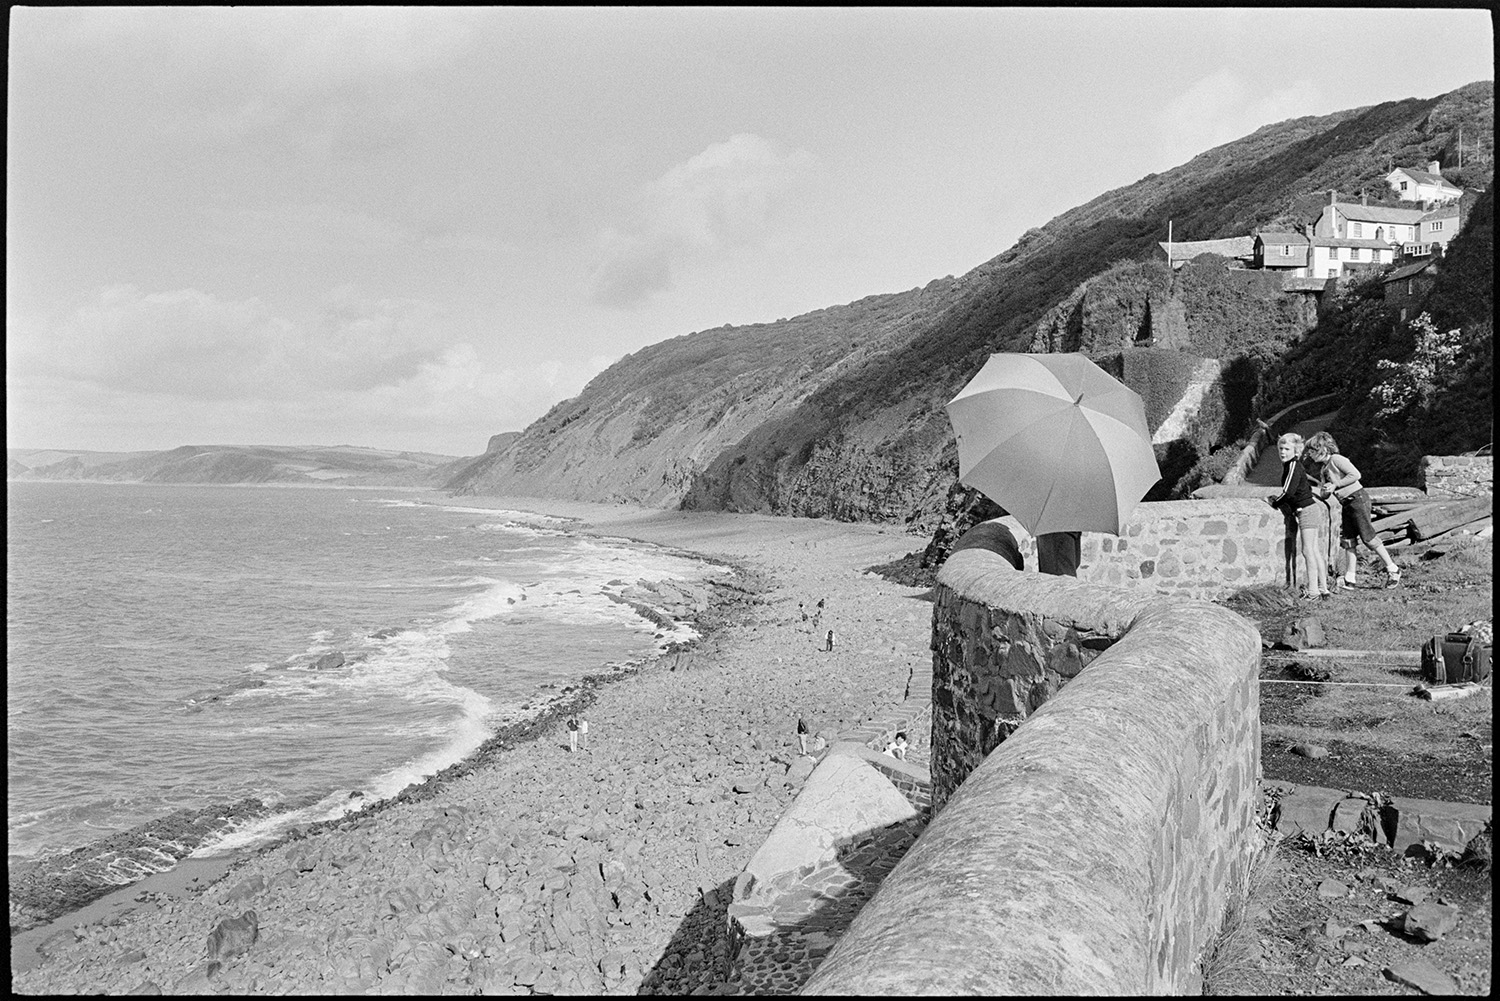 Sea wall with holidaymakers at old harbour, coastal view. 
[Holidaymakers looking over the sea wall to the pebble beach and sea below at Bucks Mills. One person is holding an umbrella and people can be seen walking on the beach below. Houses and the cliffs can be seen in the background.]